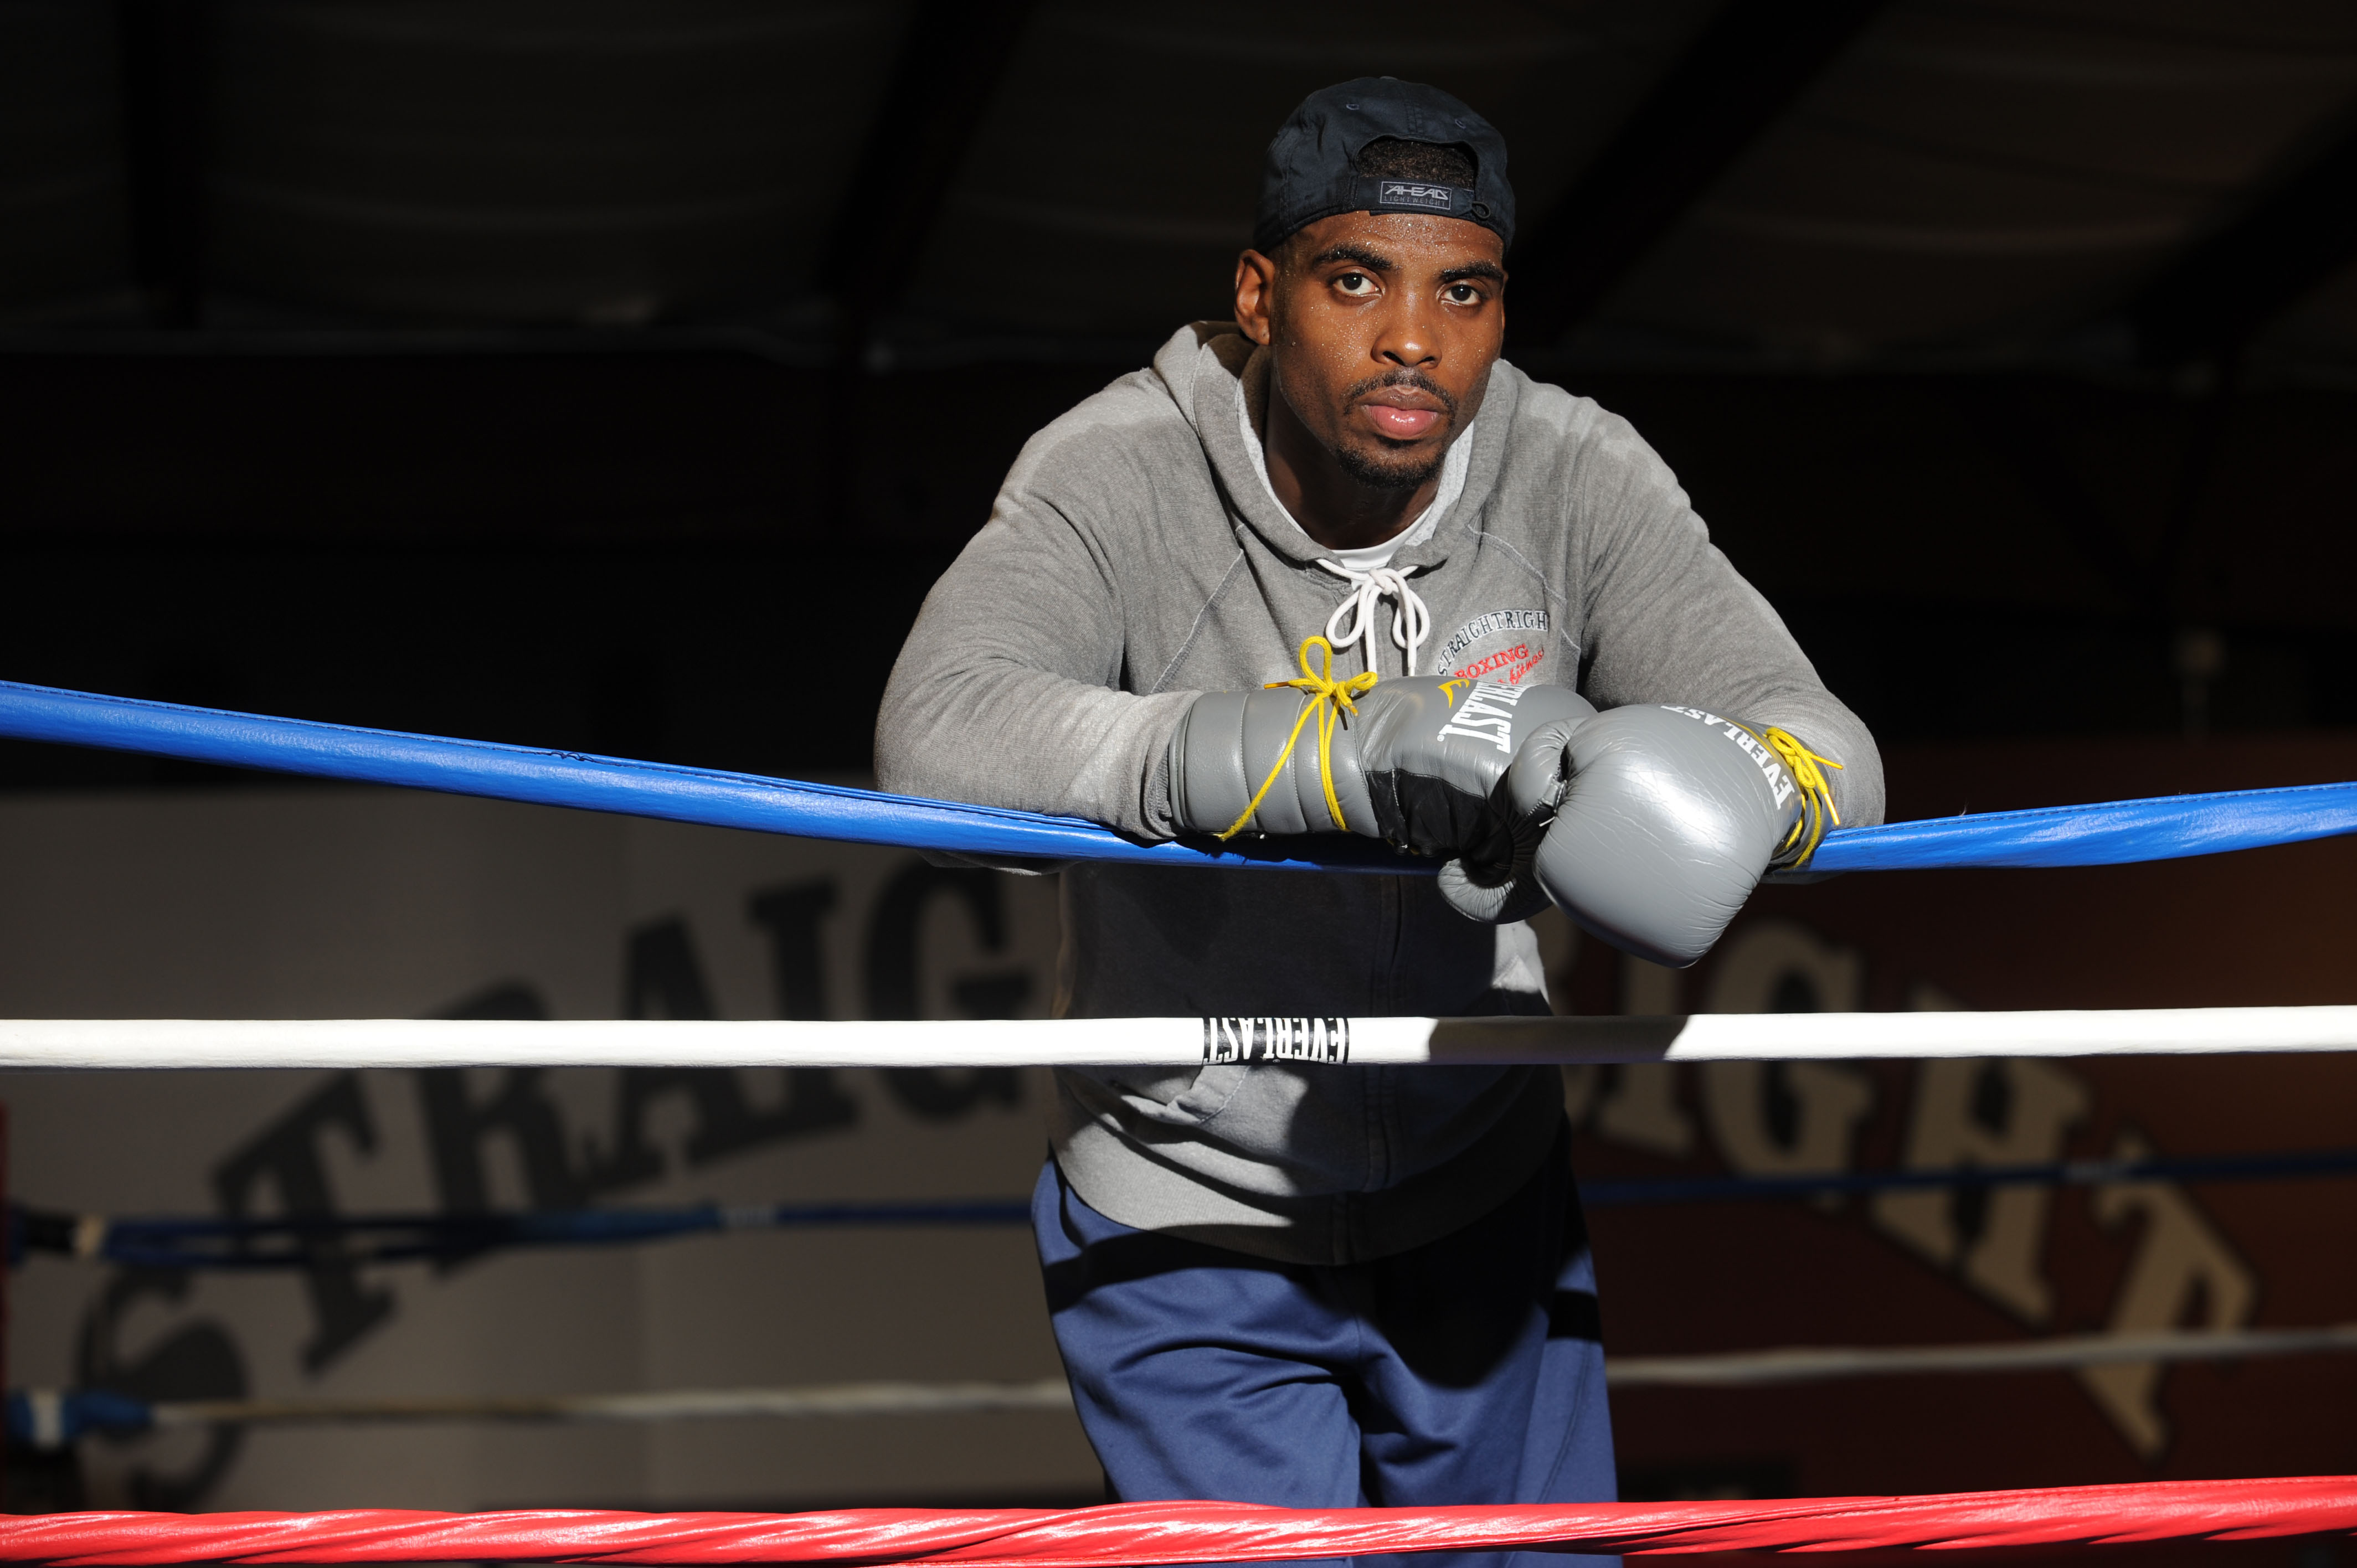 Fayetteville boxer scheduled for bout on Showtime